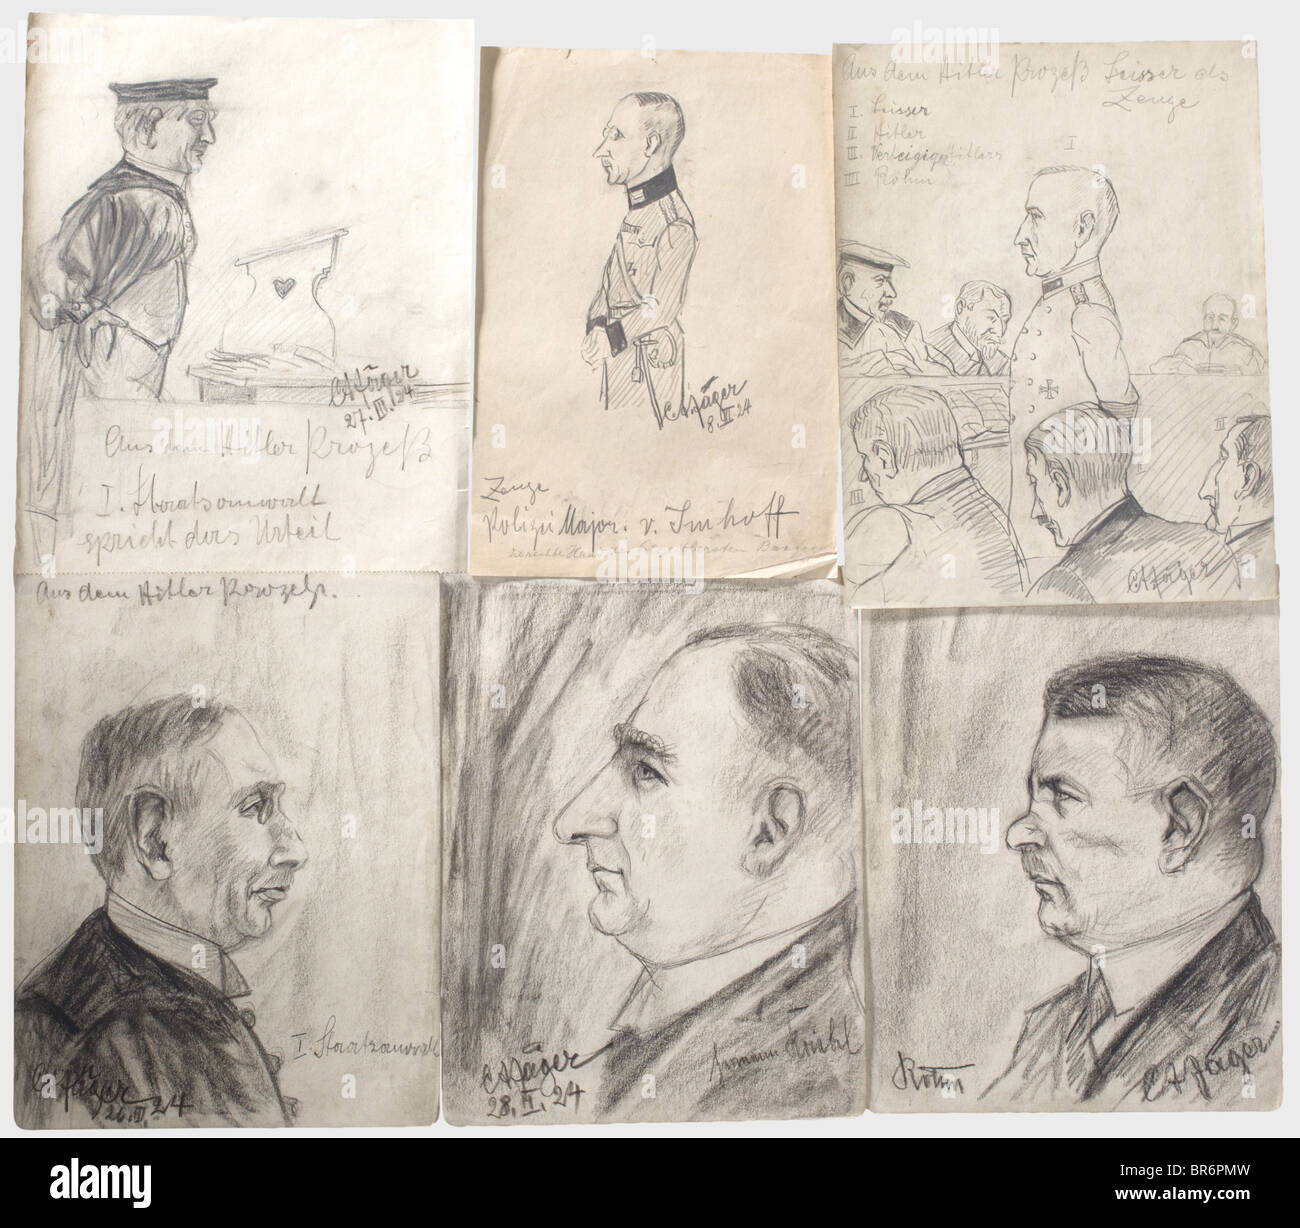 Hitler trial 1924 - sketches from the court room., 19 drawings by the trial observer Carl August Jäger made at the court hearings against Hitler and his companions of the Beer Hall Putsch on 9th November 1923. Some portraits with signatures of the depicted persons, among them Ernst Röhm and Hermann Kriebl. As no photographs were taken during the proceedings, this is the only authentic picture material of the Hitler trial, which was held at the People's Court Munich I. Jäger sold the drawings, some of which entered the Munich Monacensia Library. Carl August Jäge, Stock Photo